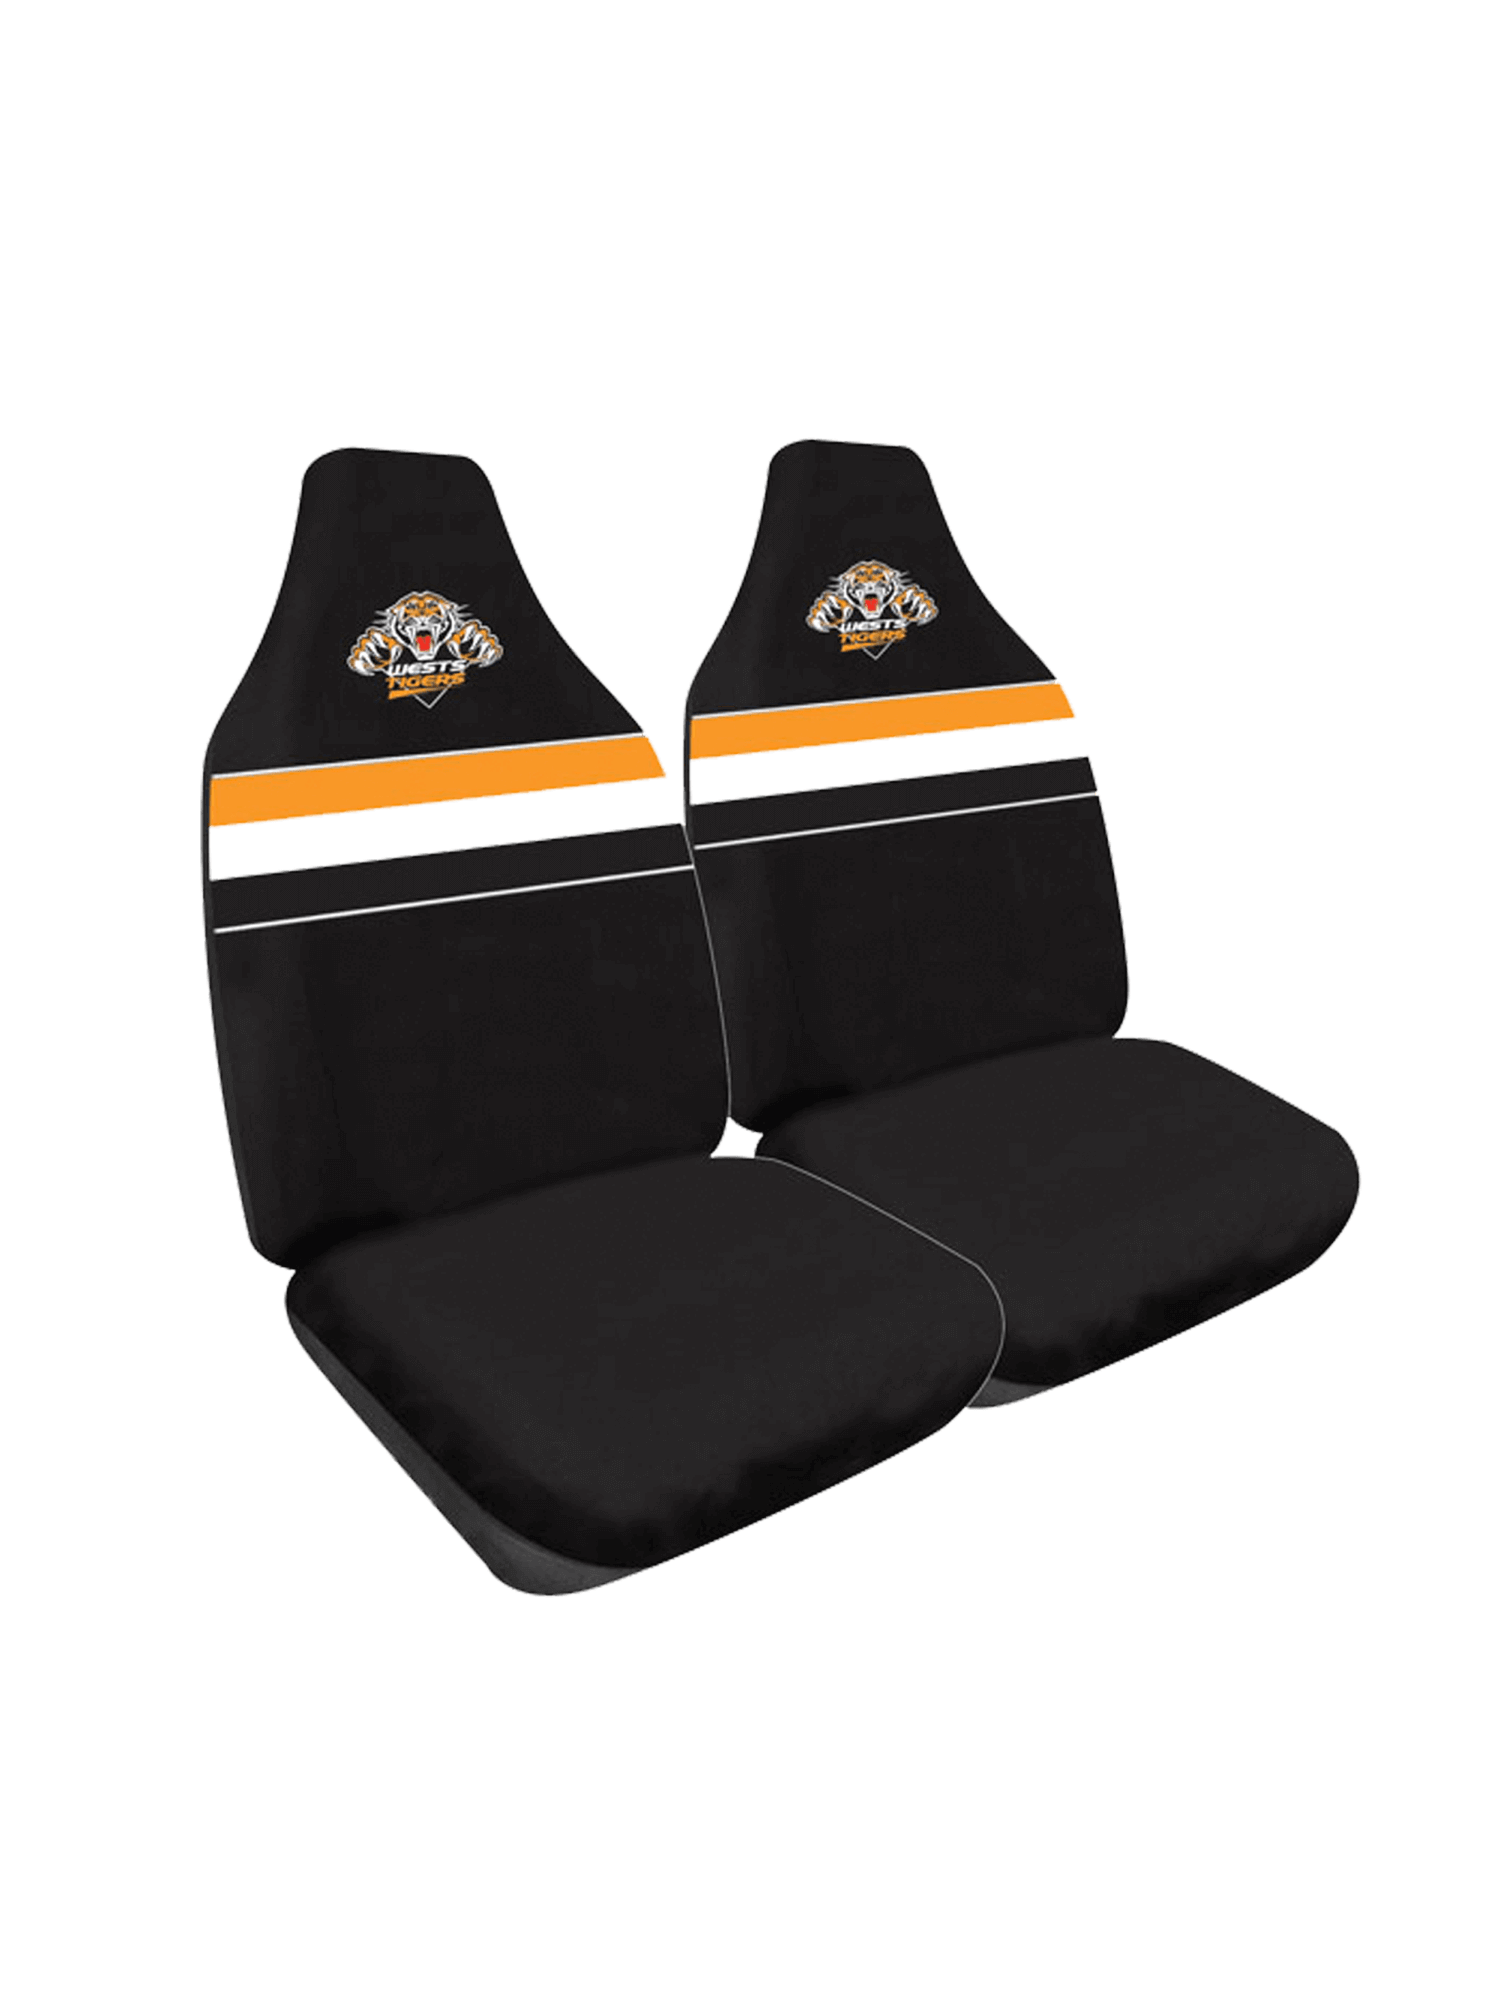 WESTS TIGERS CAR SEAT COVERS_WESTS TIGERS_STUBBY CLUB